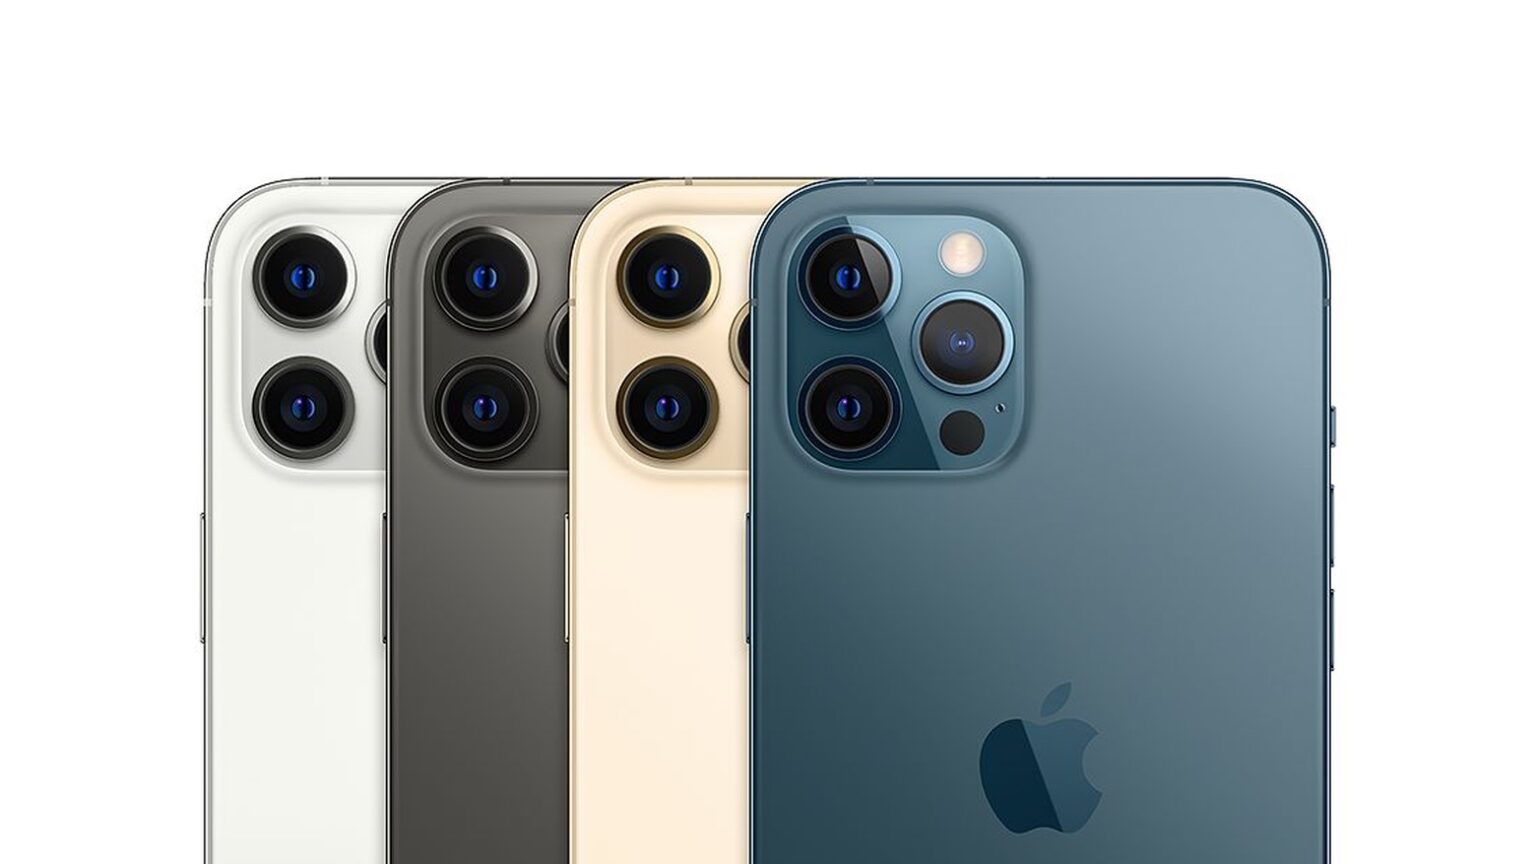 iPhone 12 Pro series include cameras tat support ProRAW